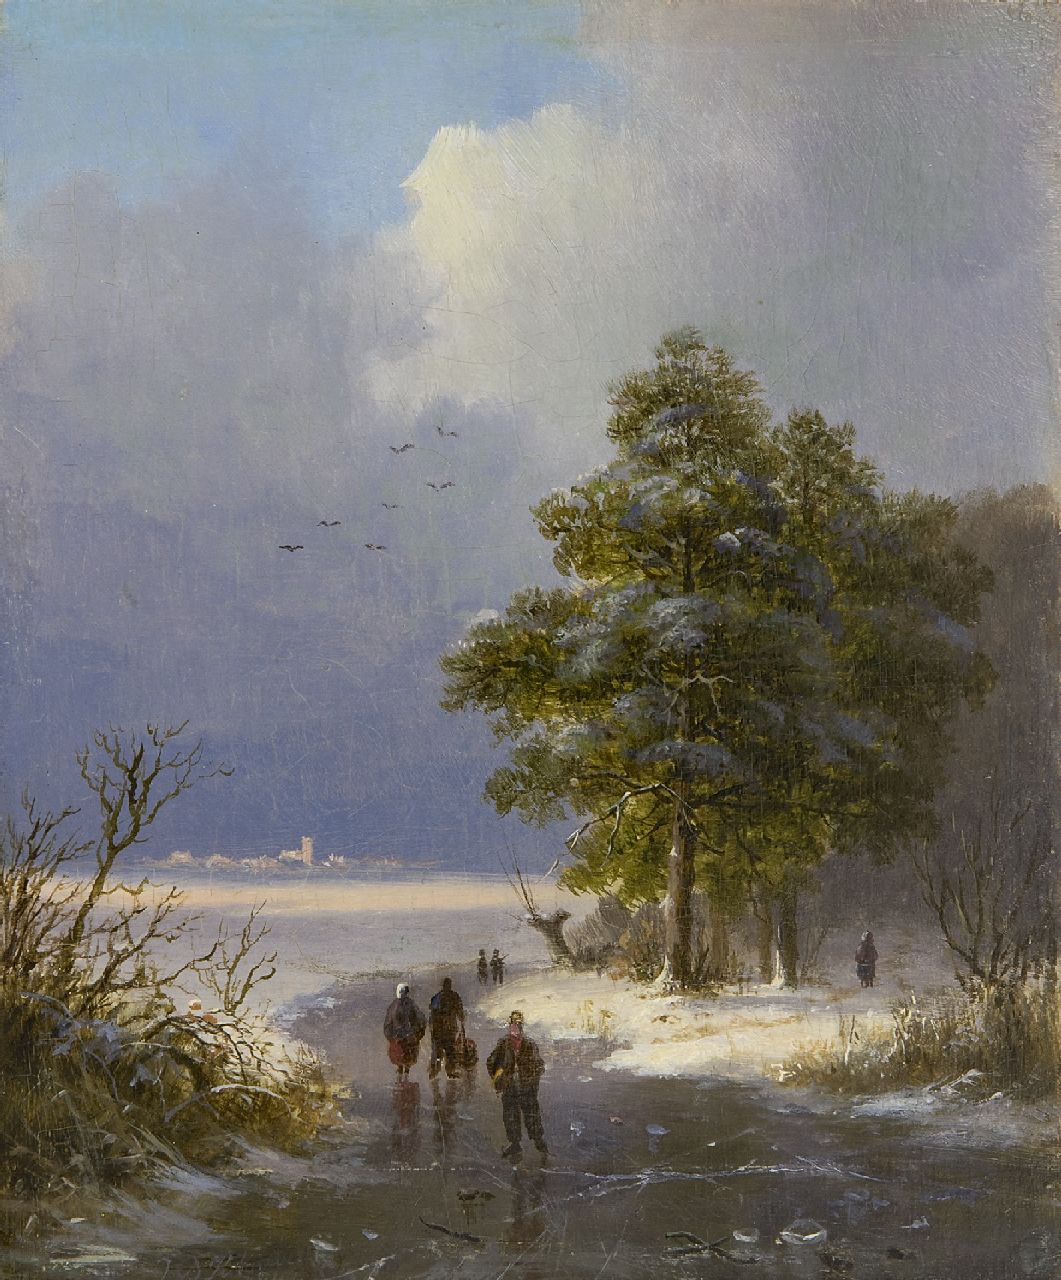 Klombeck J.B.  | Johann Bernard Klombeck | Paintings offered for sale | Winter landscape with ice skaters, oil on panel 16.4 x 13.5 cm, signed l.l. and dated 1842